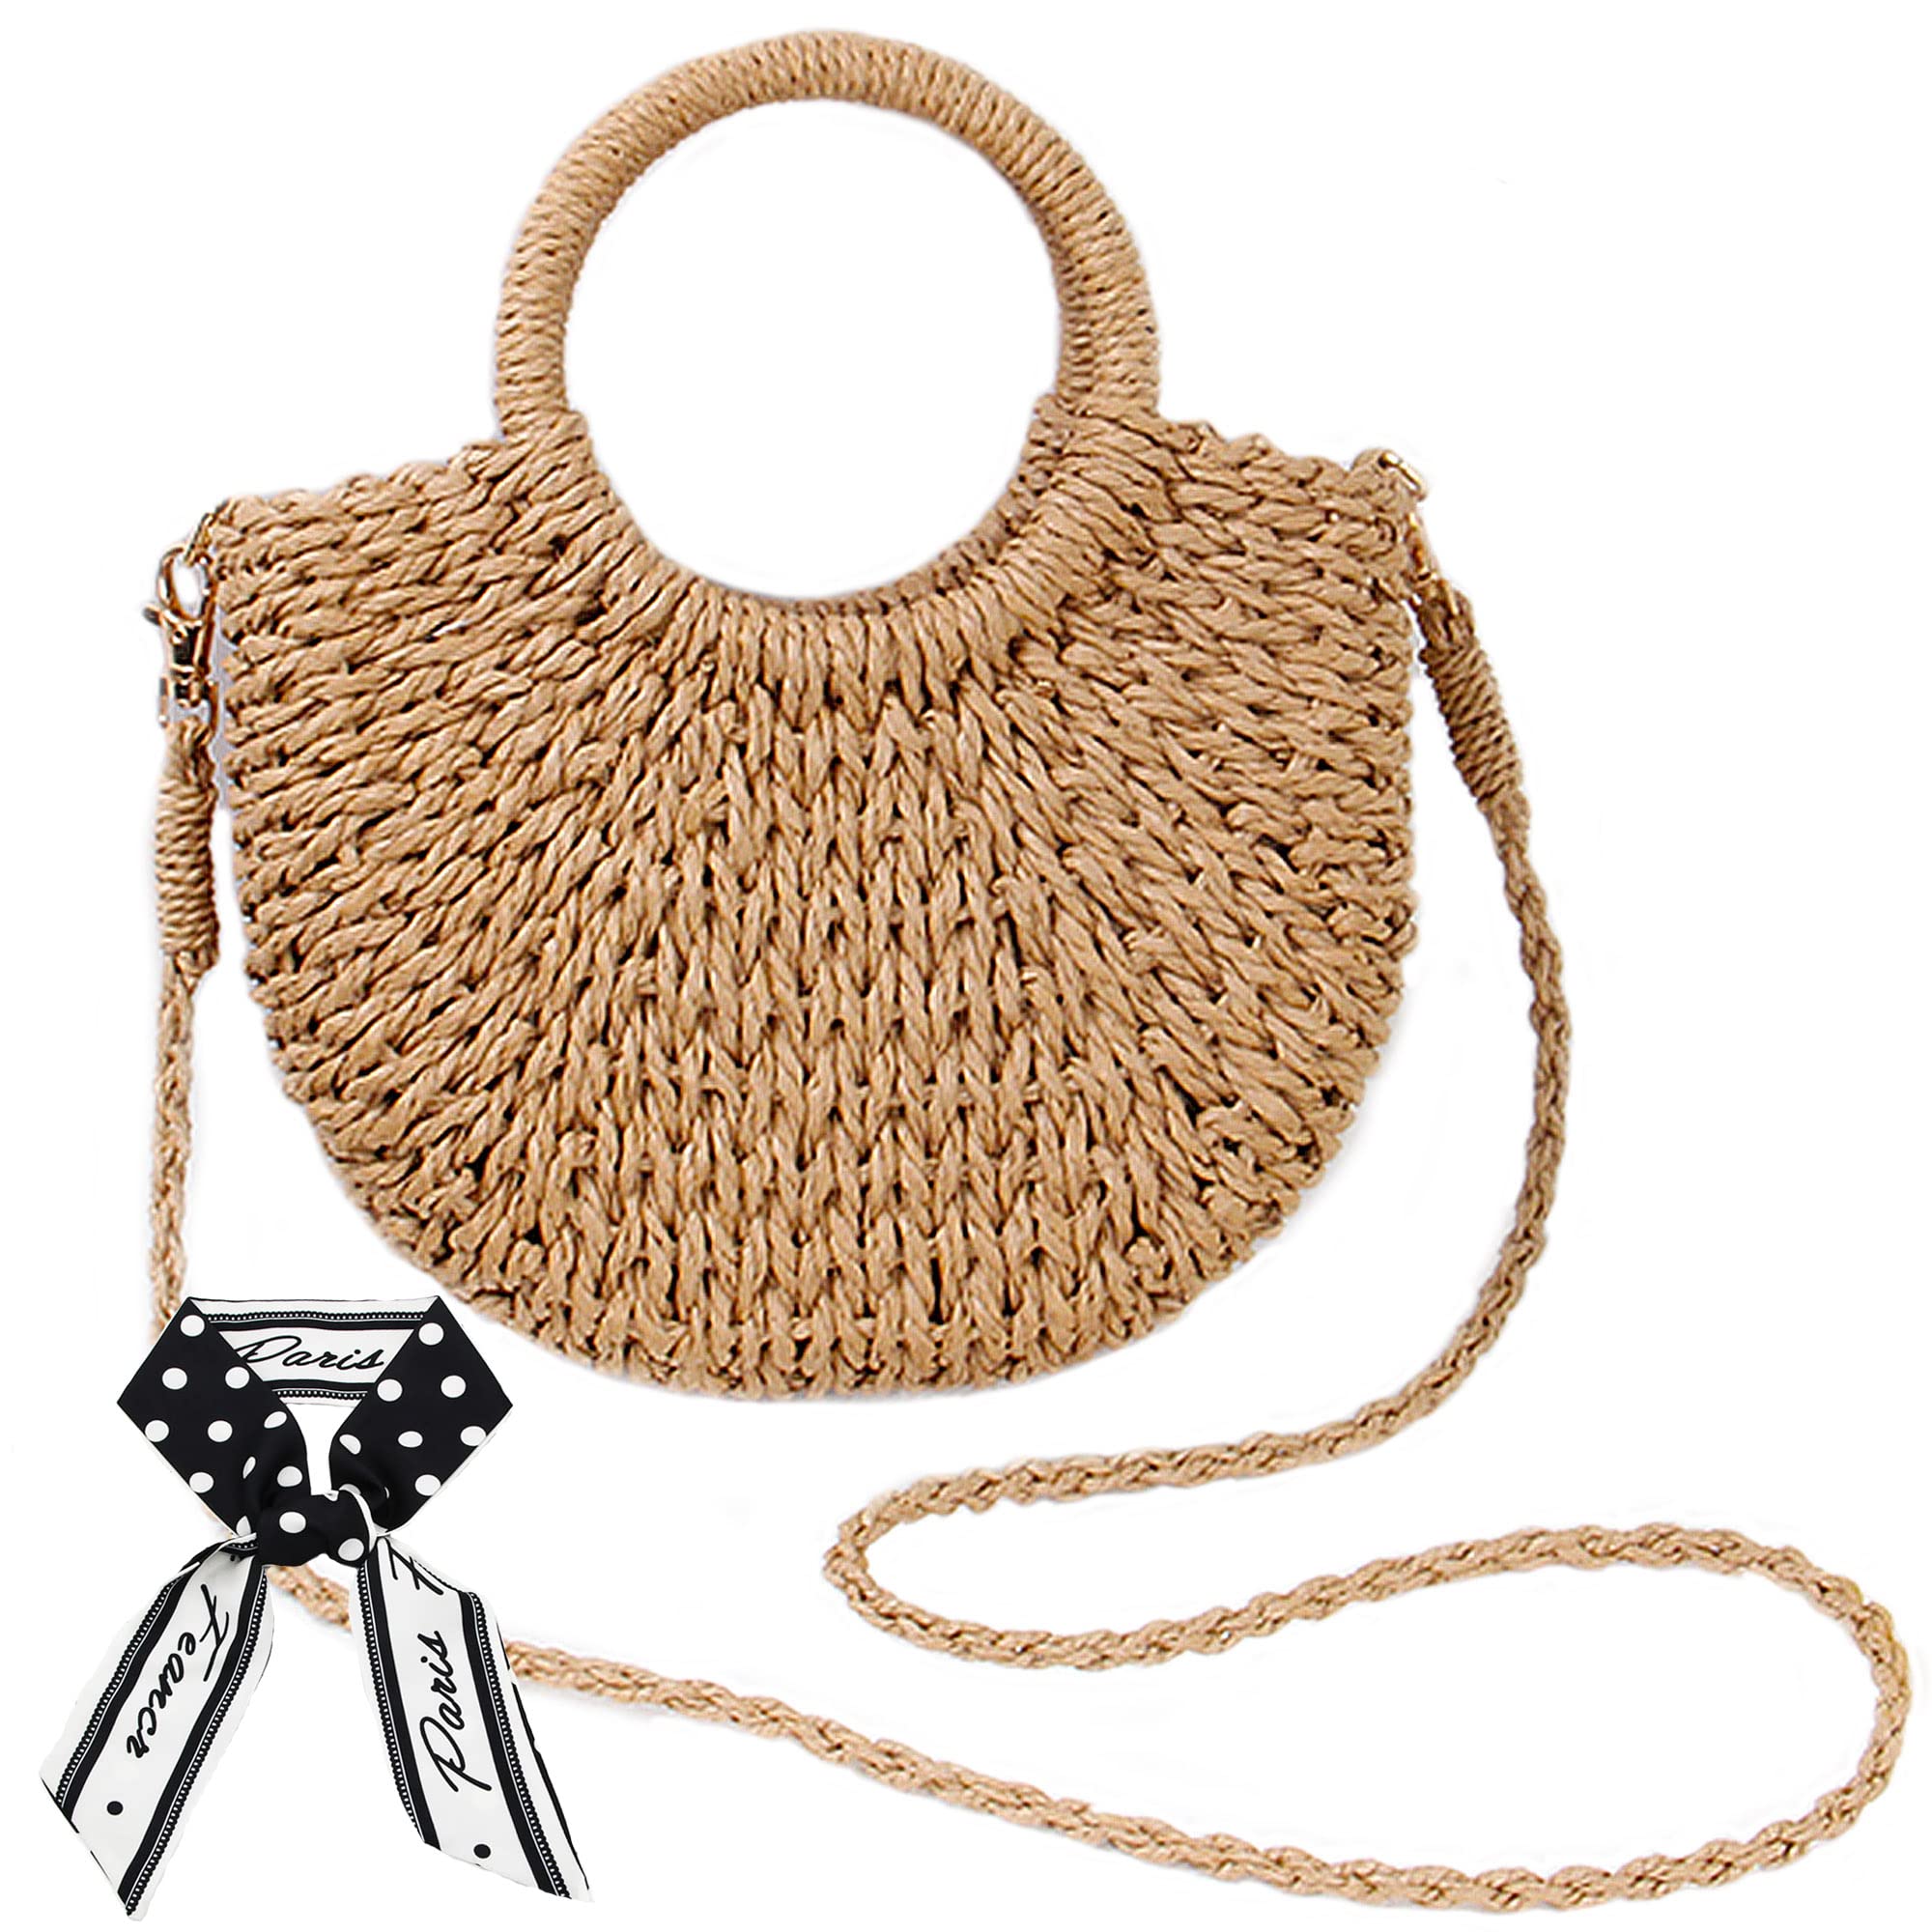 The best straw bags for summer 2023